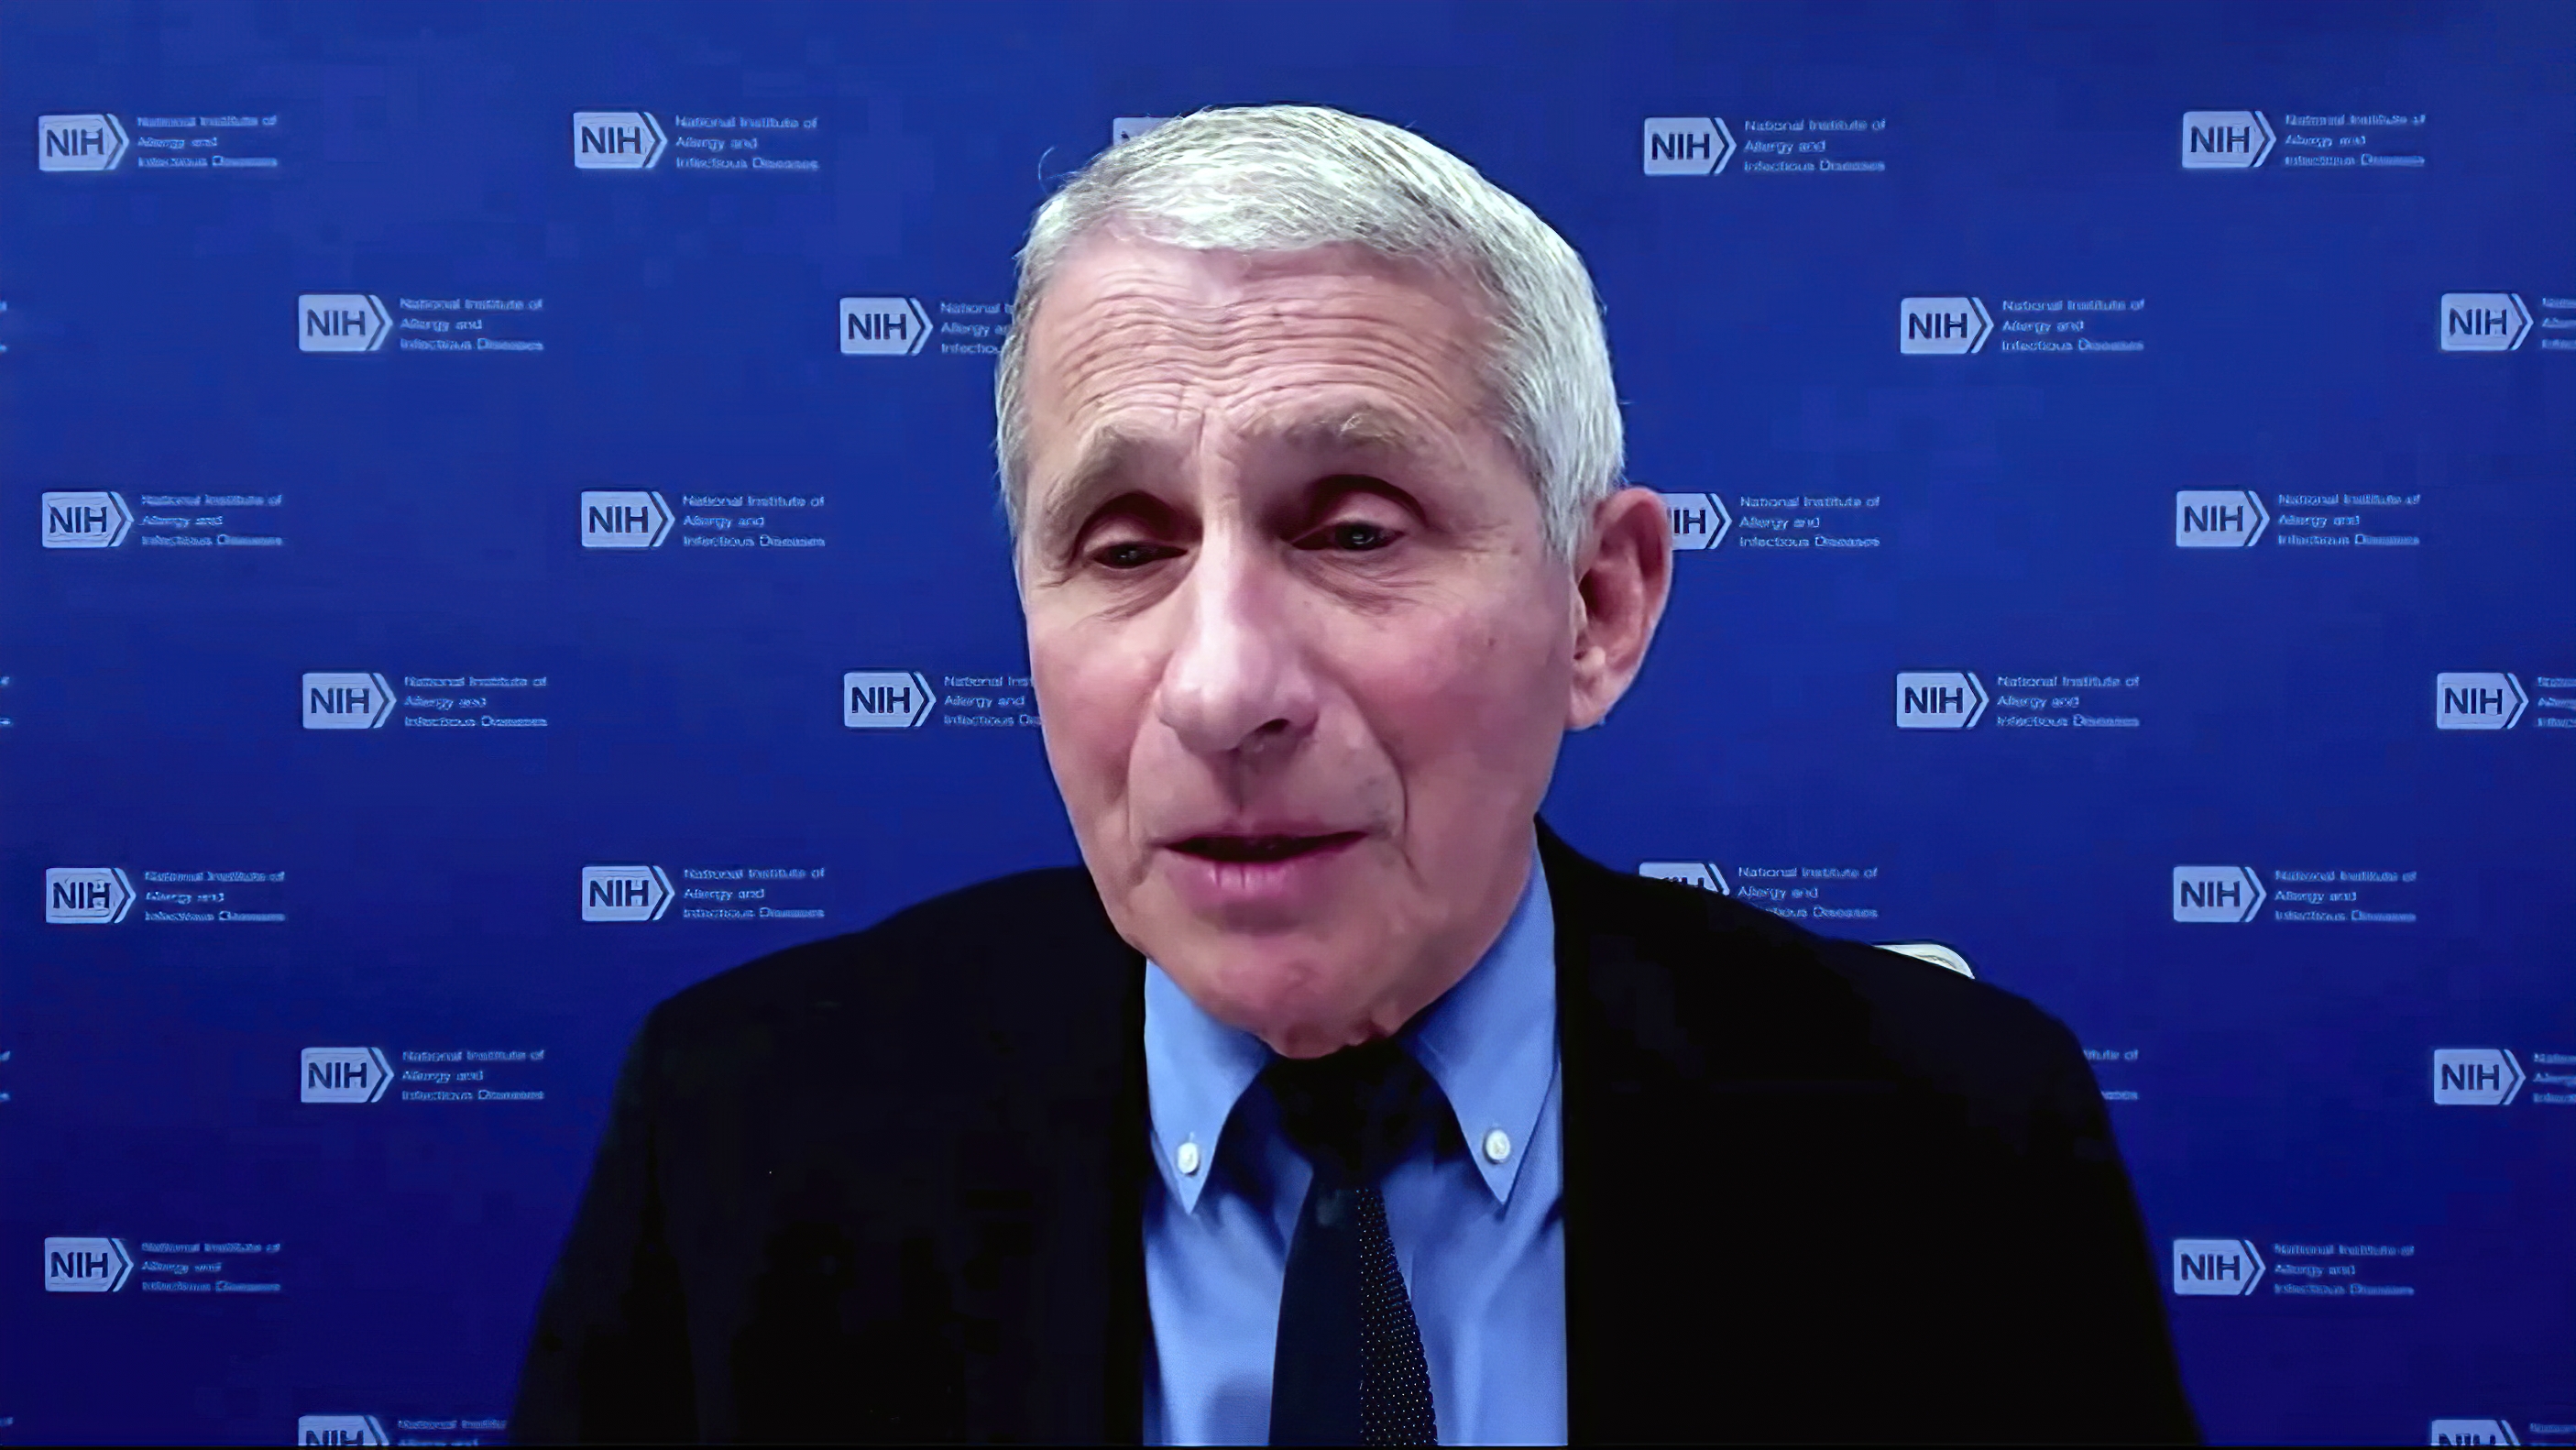 Fauci: ‘Hunting season’ for COVID-19 vaccine may start in April